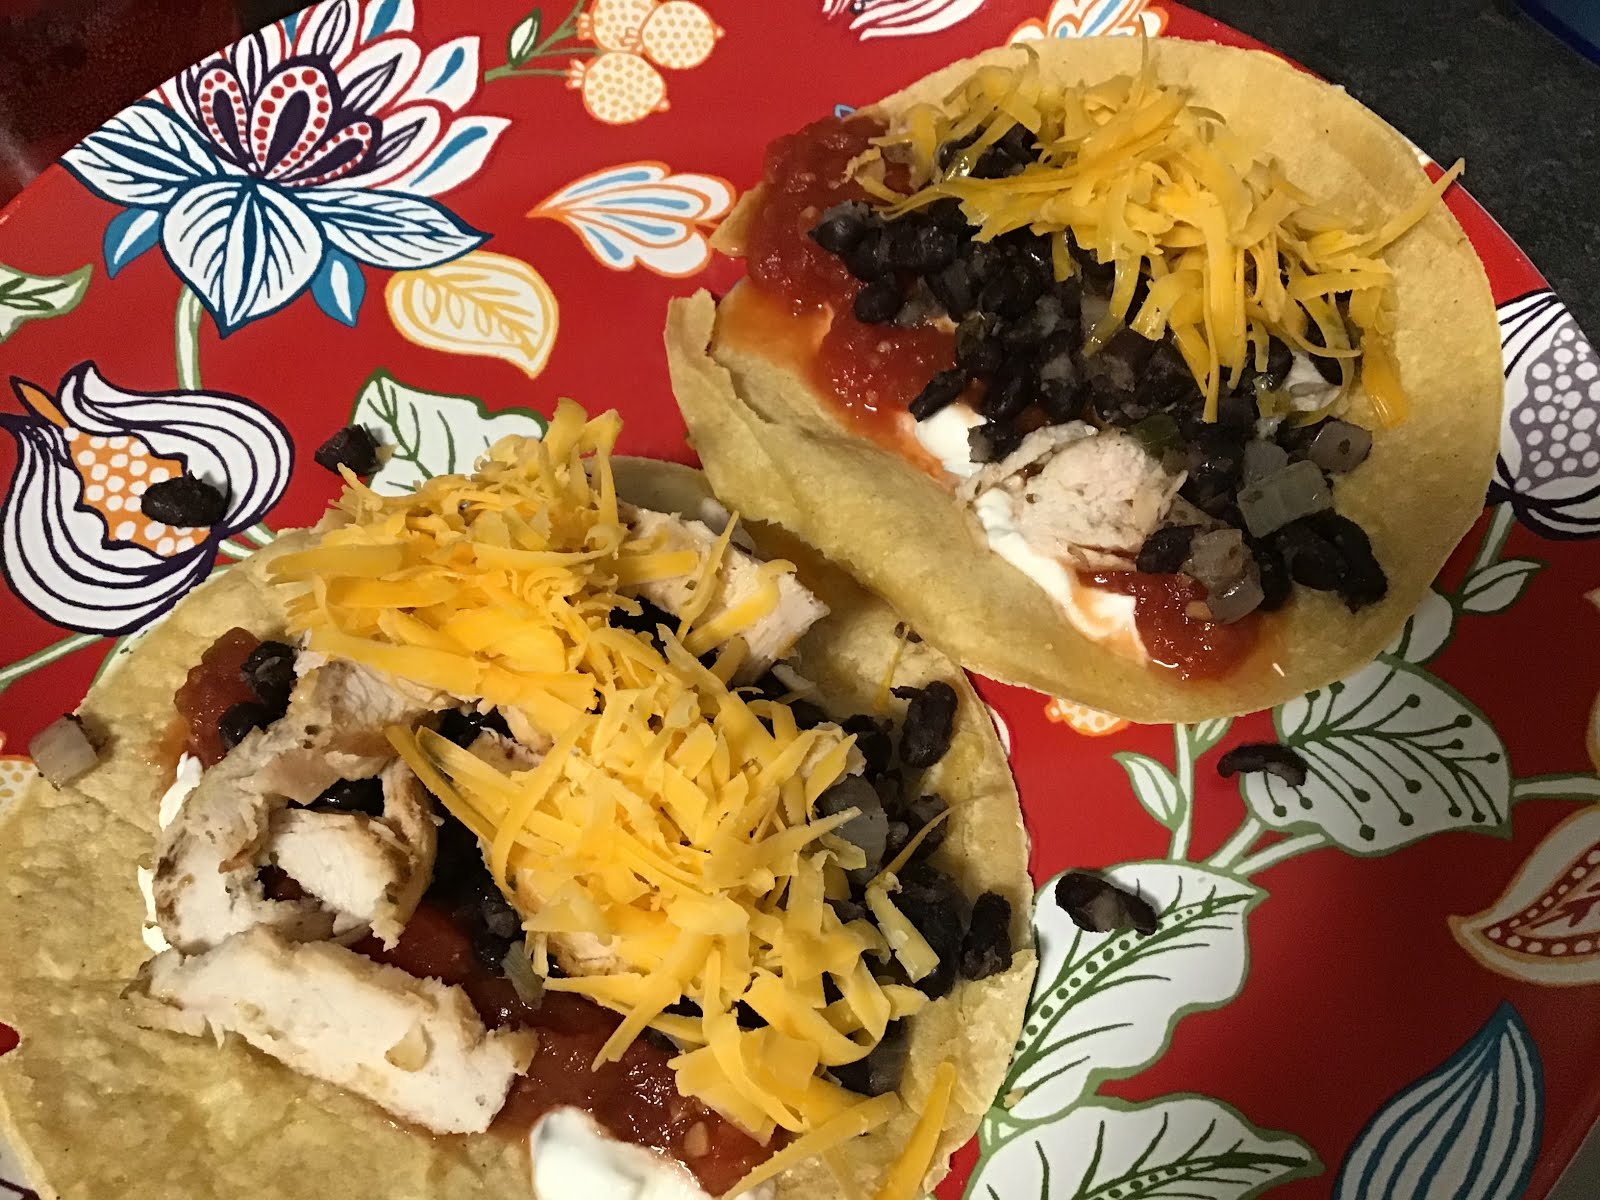 Black Bean and Chicken Tacos